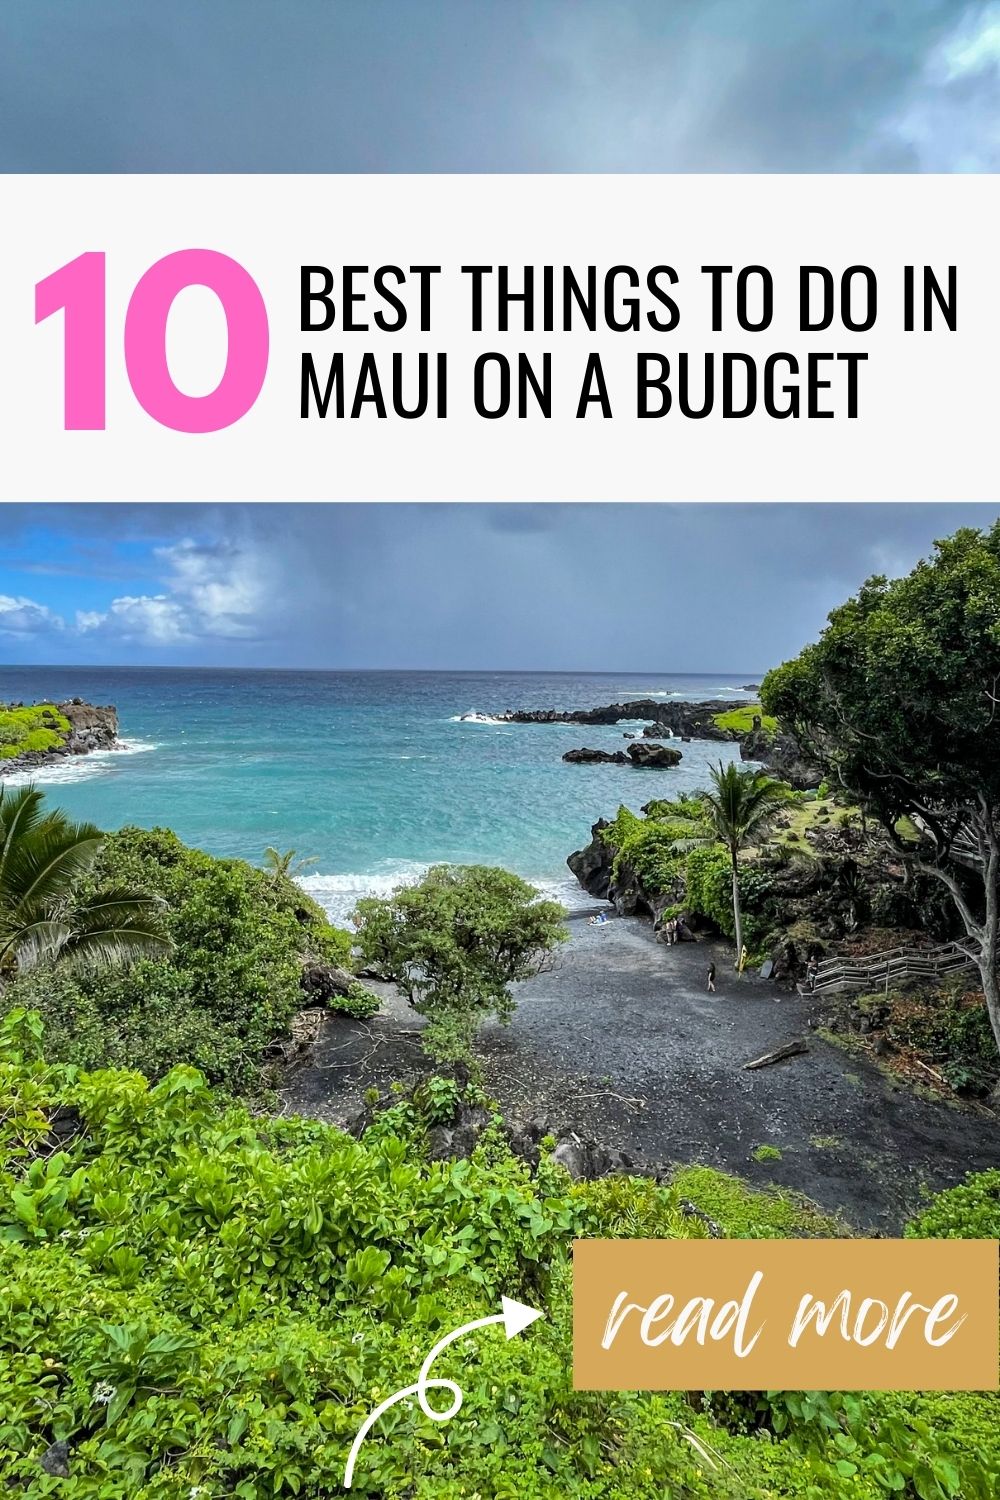 Pinterest pin image 10 Best Things to do in Maui on a Budget